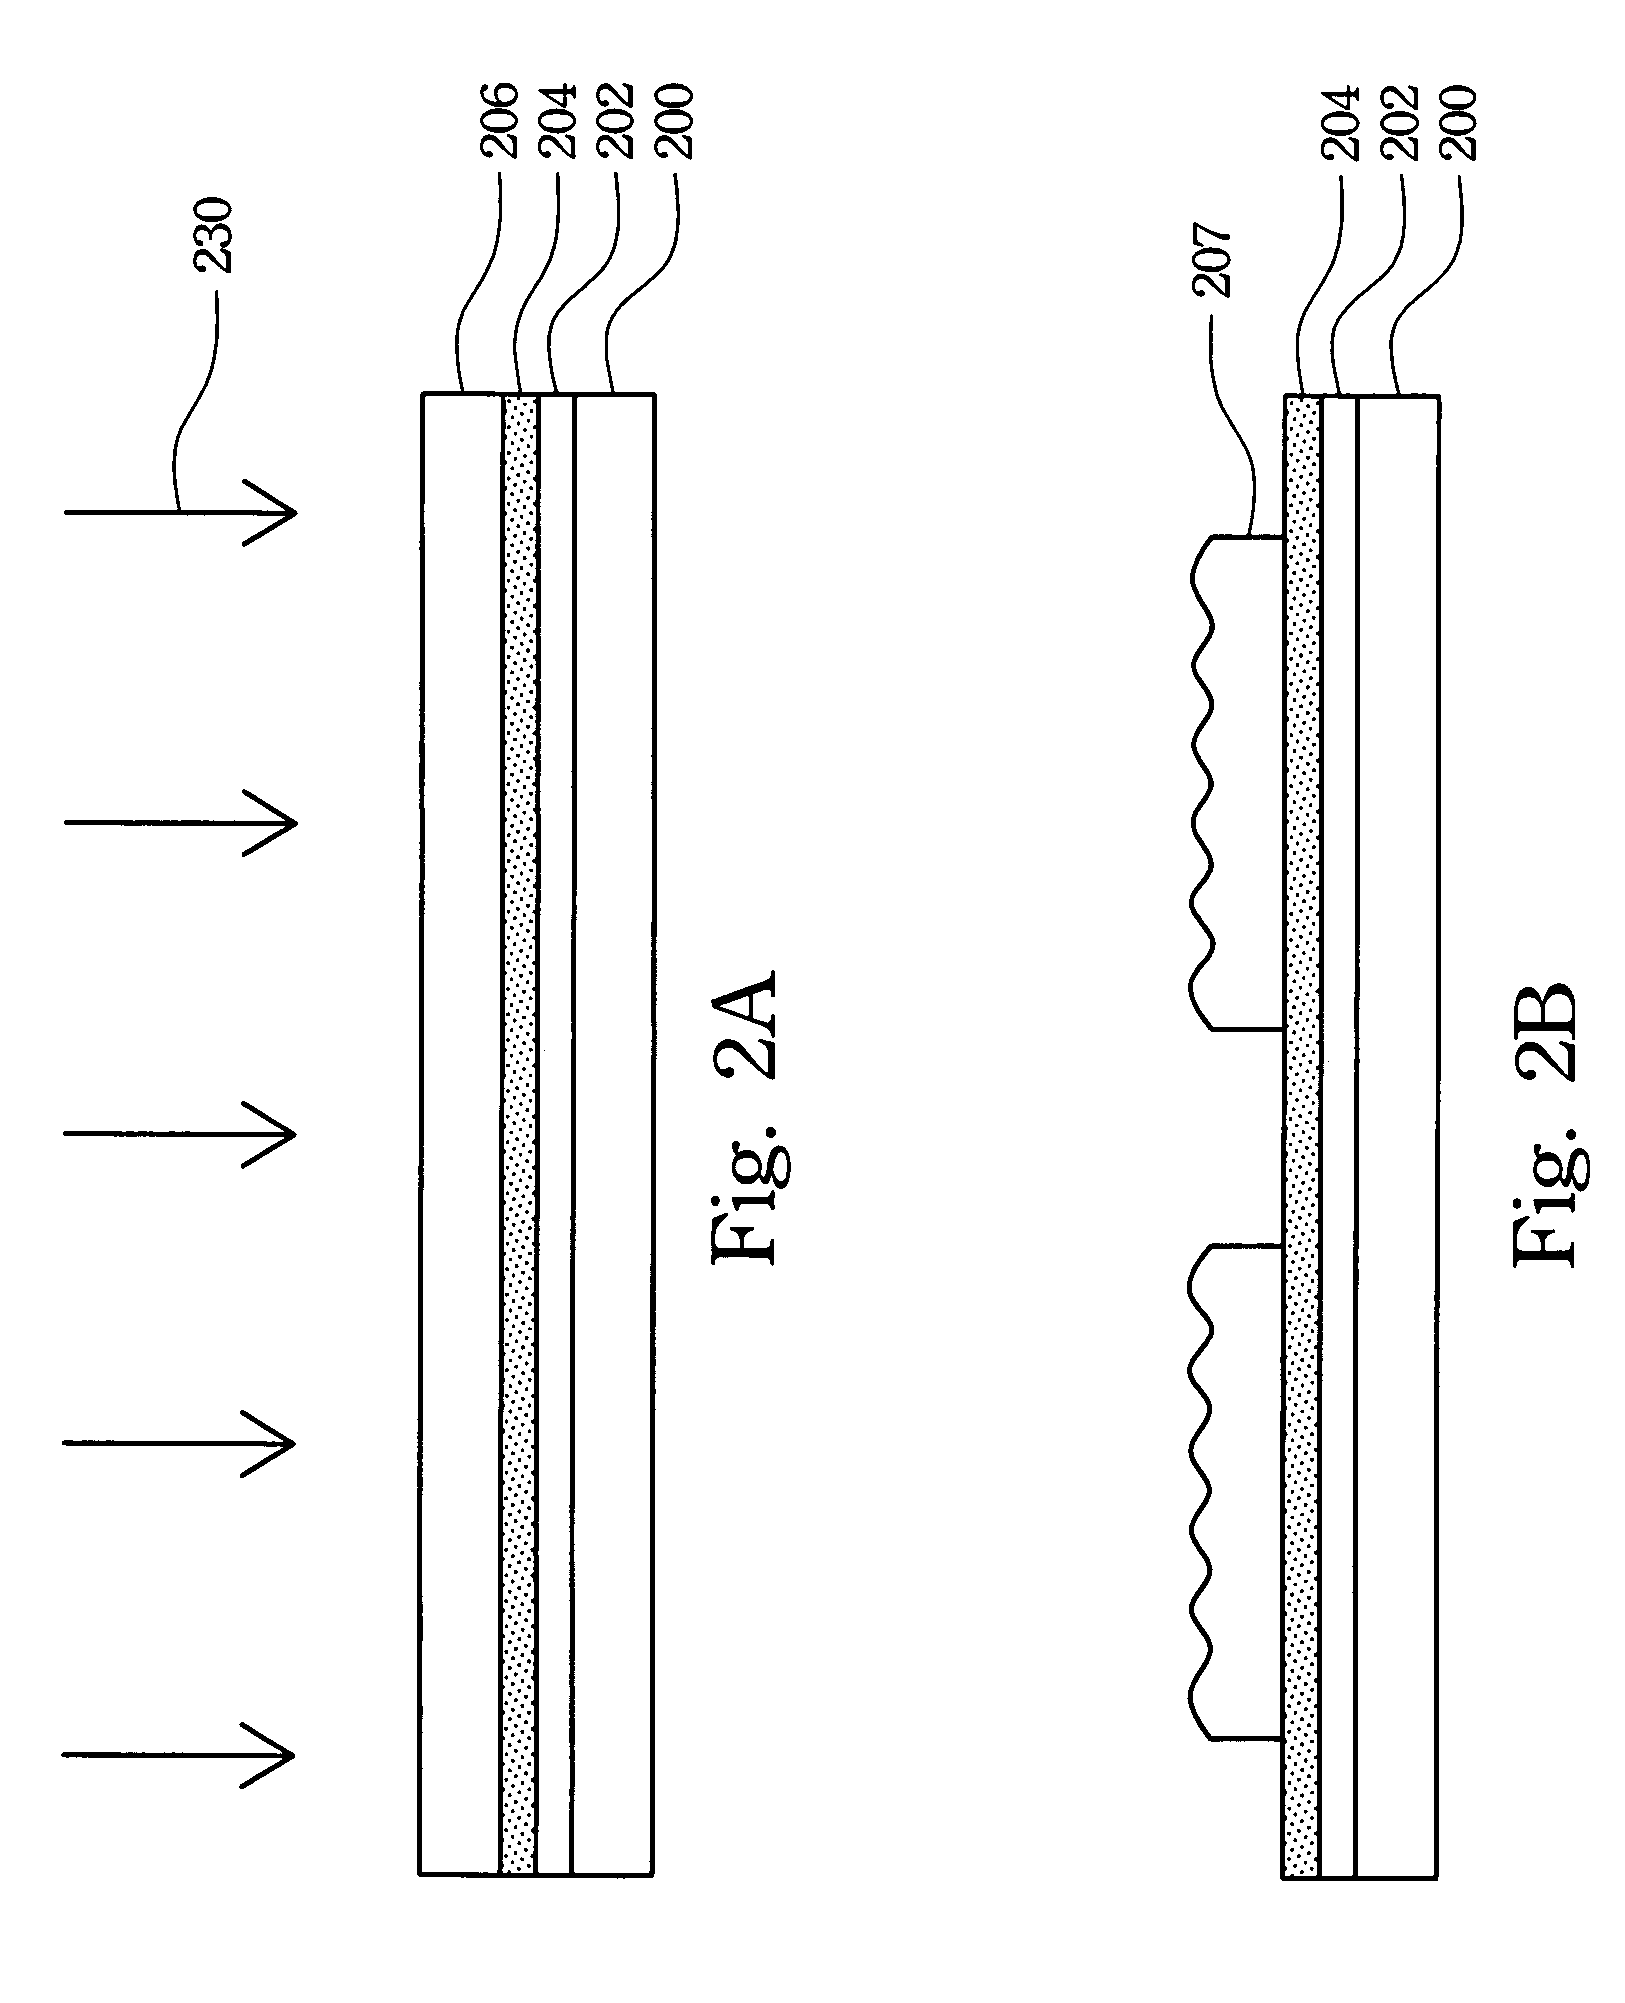 Method of fabricating planarized poly-silicon thin film transistors